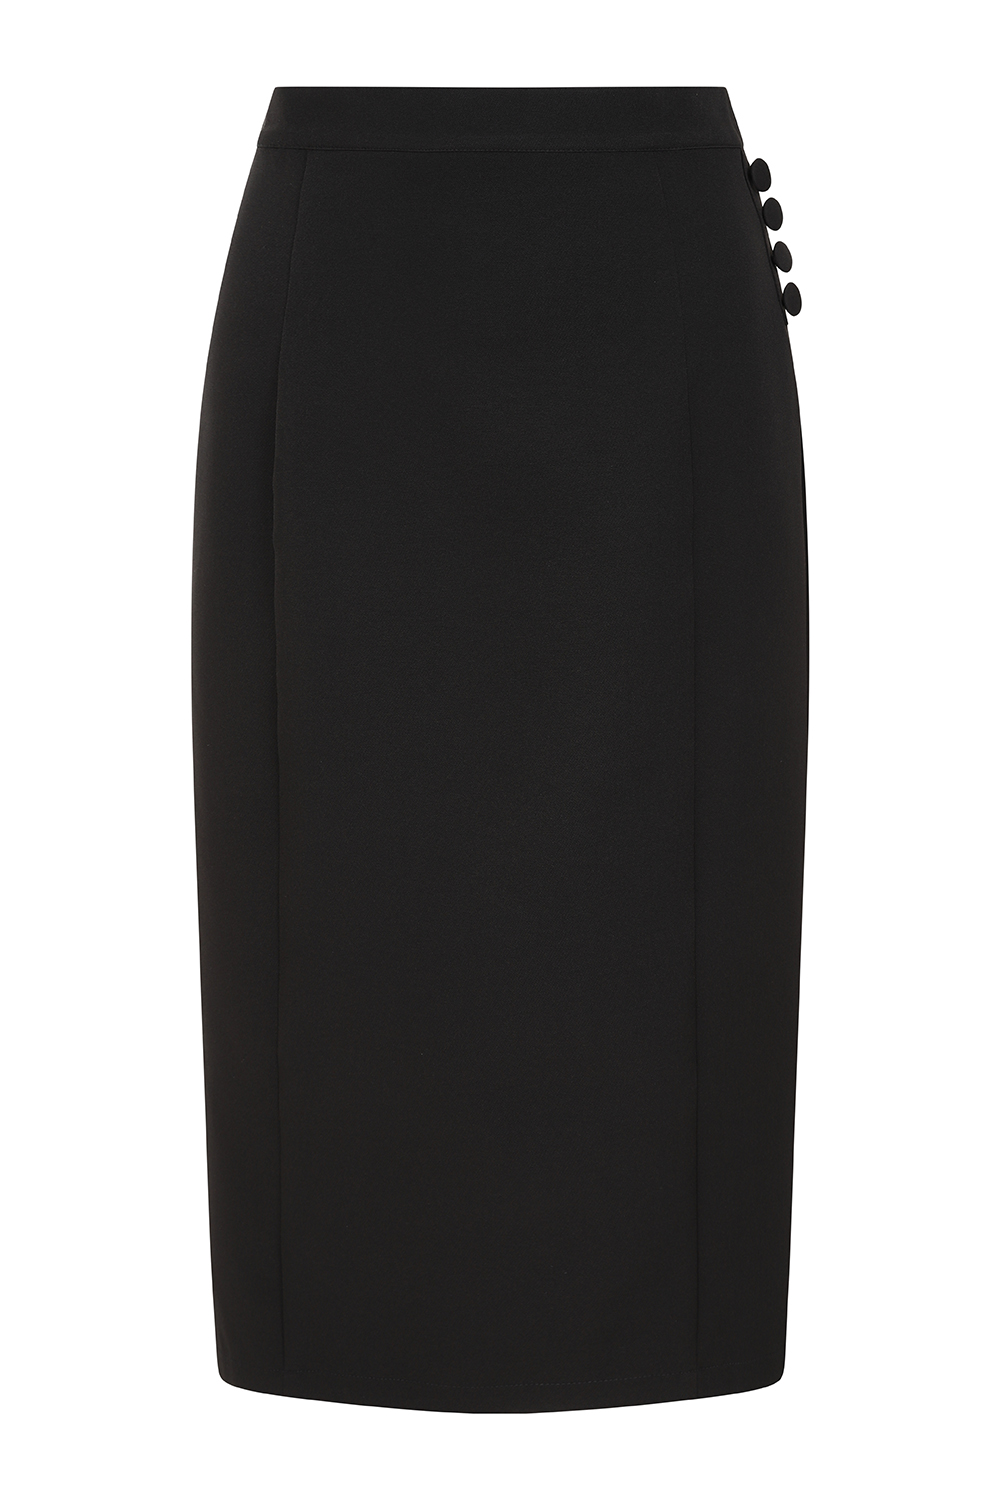 Riley Wiggle Skirt in Black - Hearts & Roses London